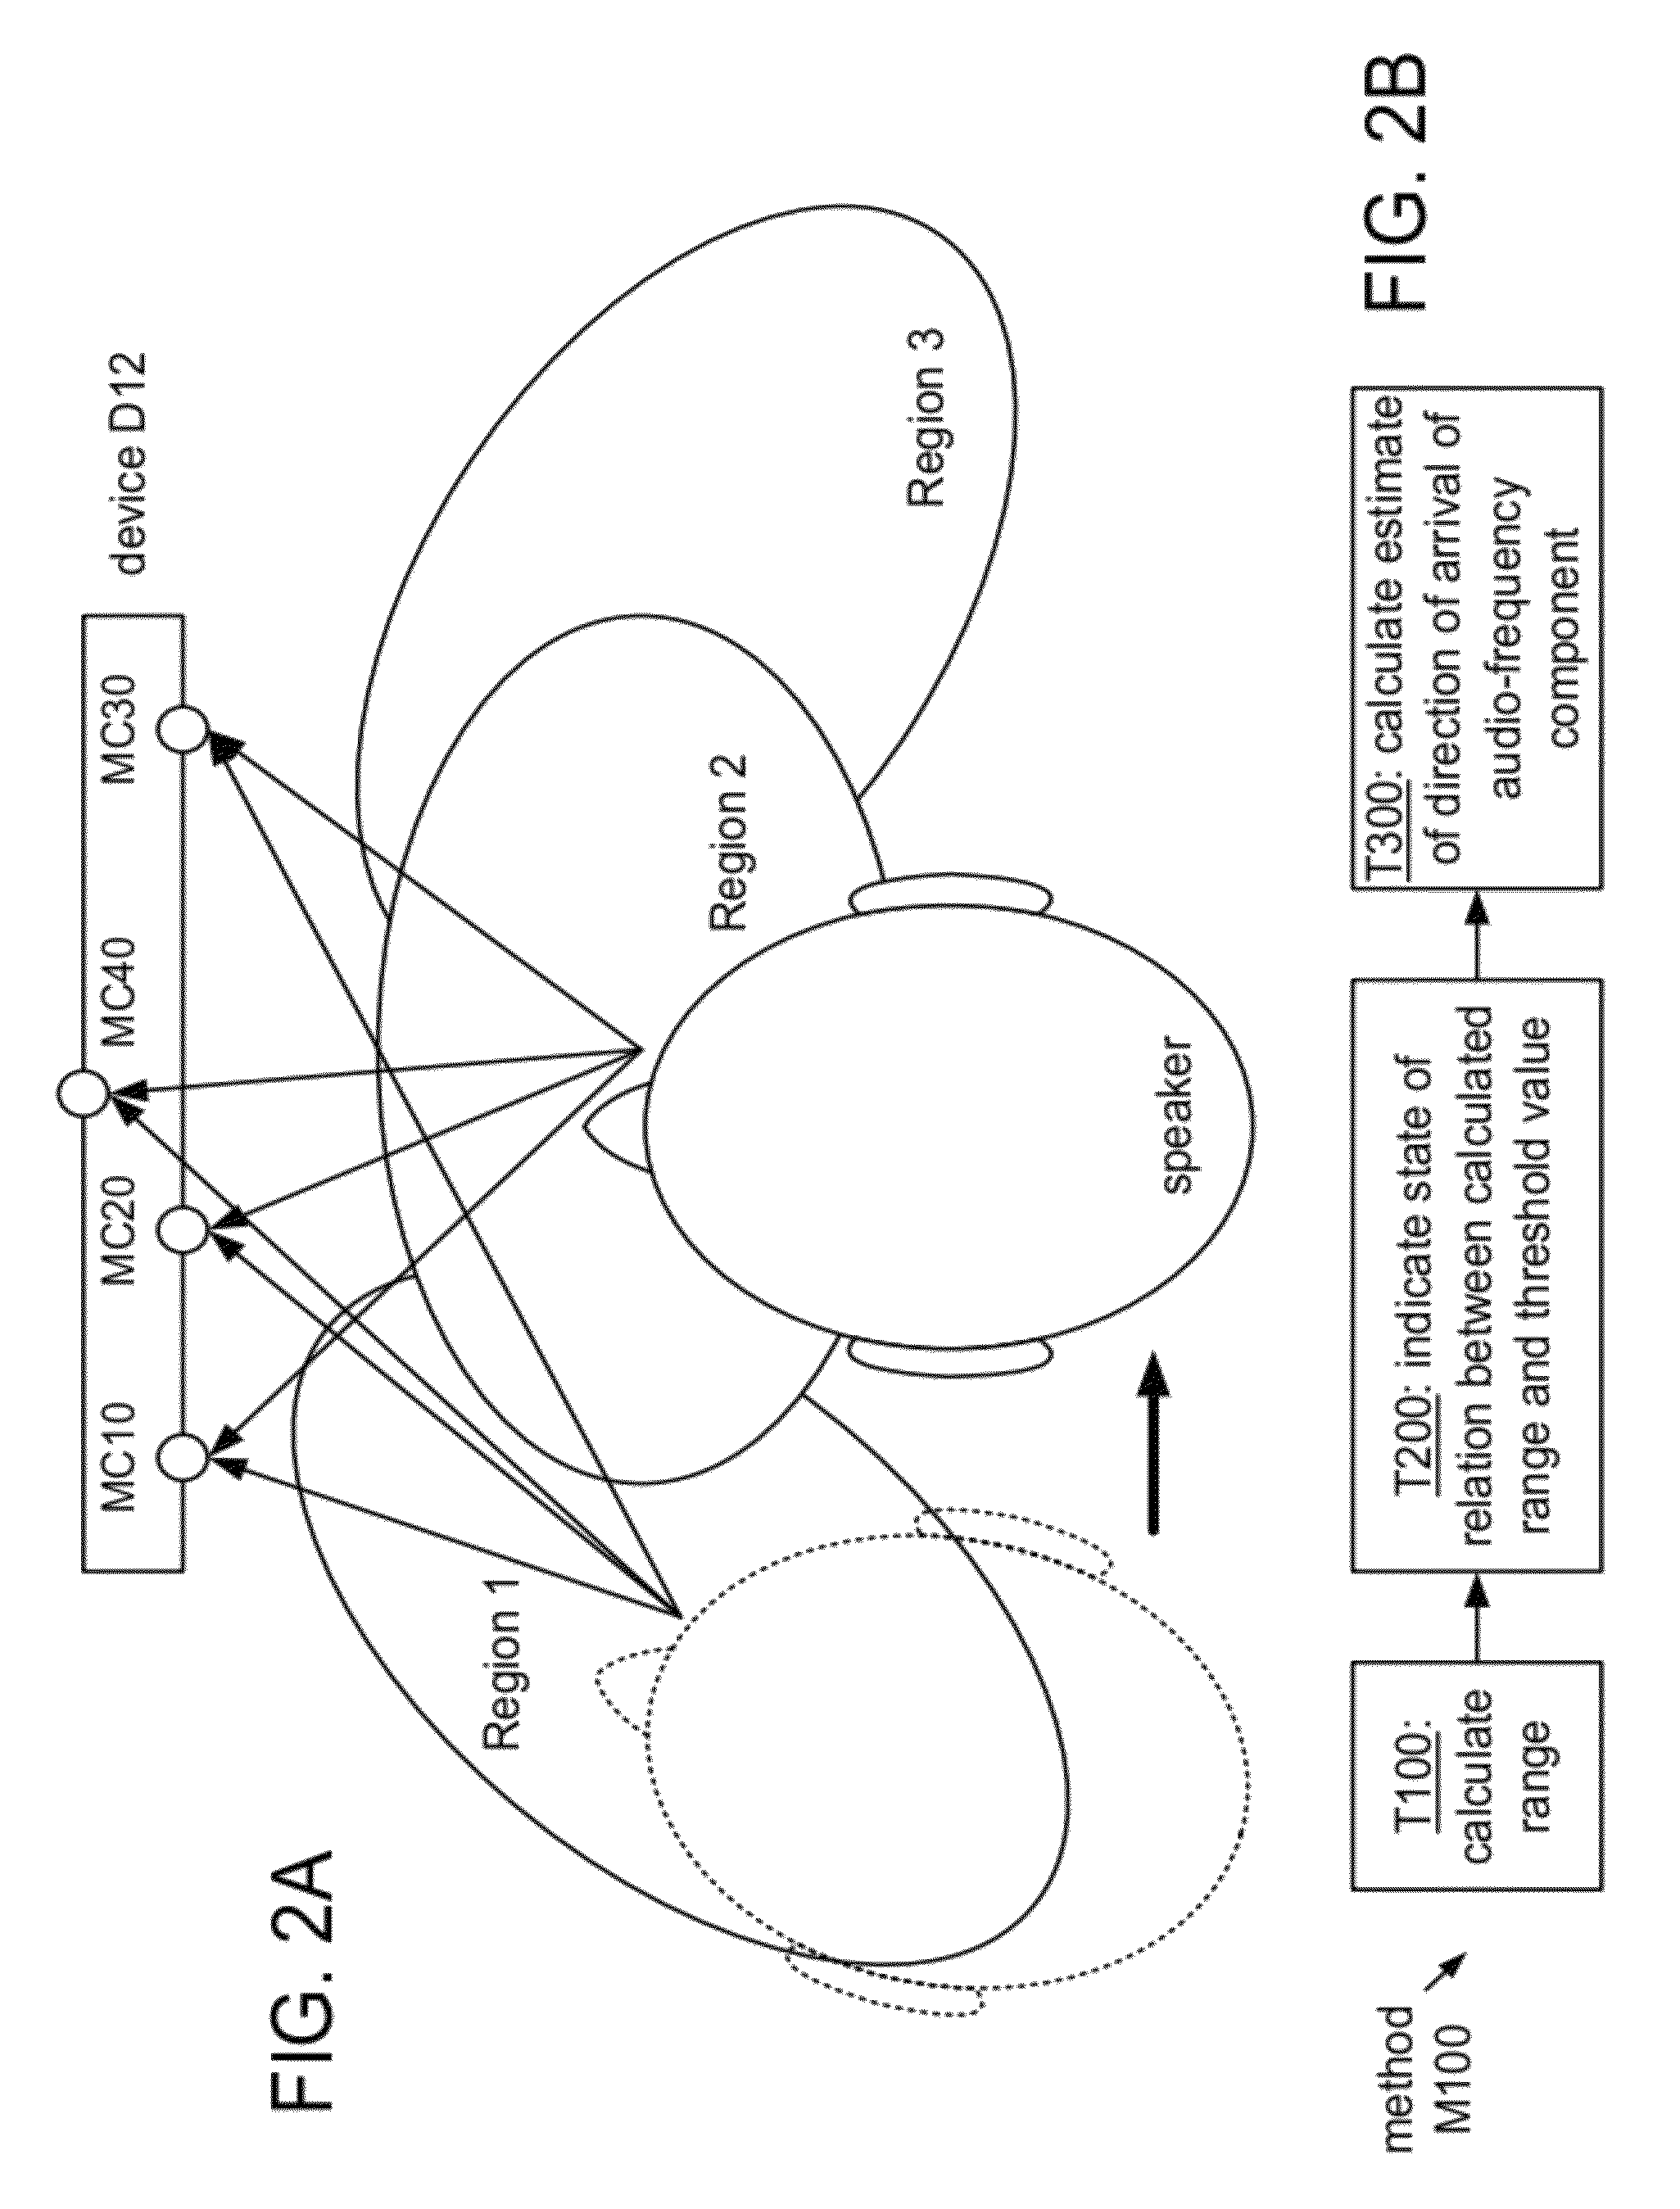 Systems, methods, apparatus, and computer-readable media for source localization using audible sound and ultrasound